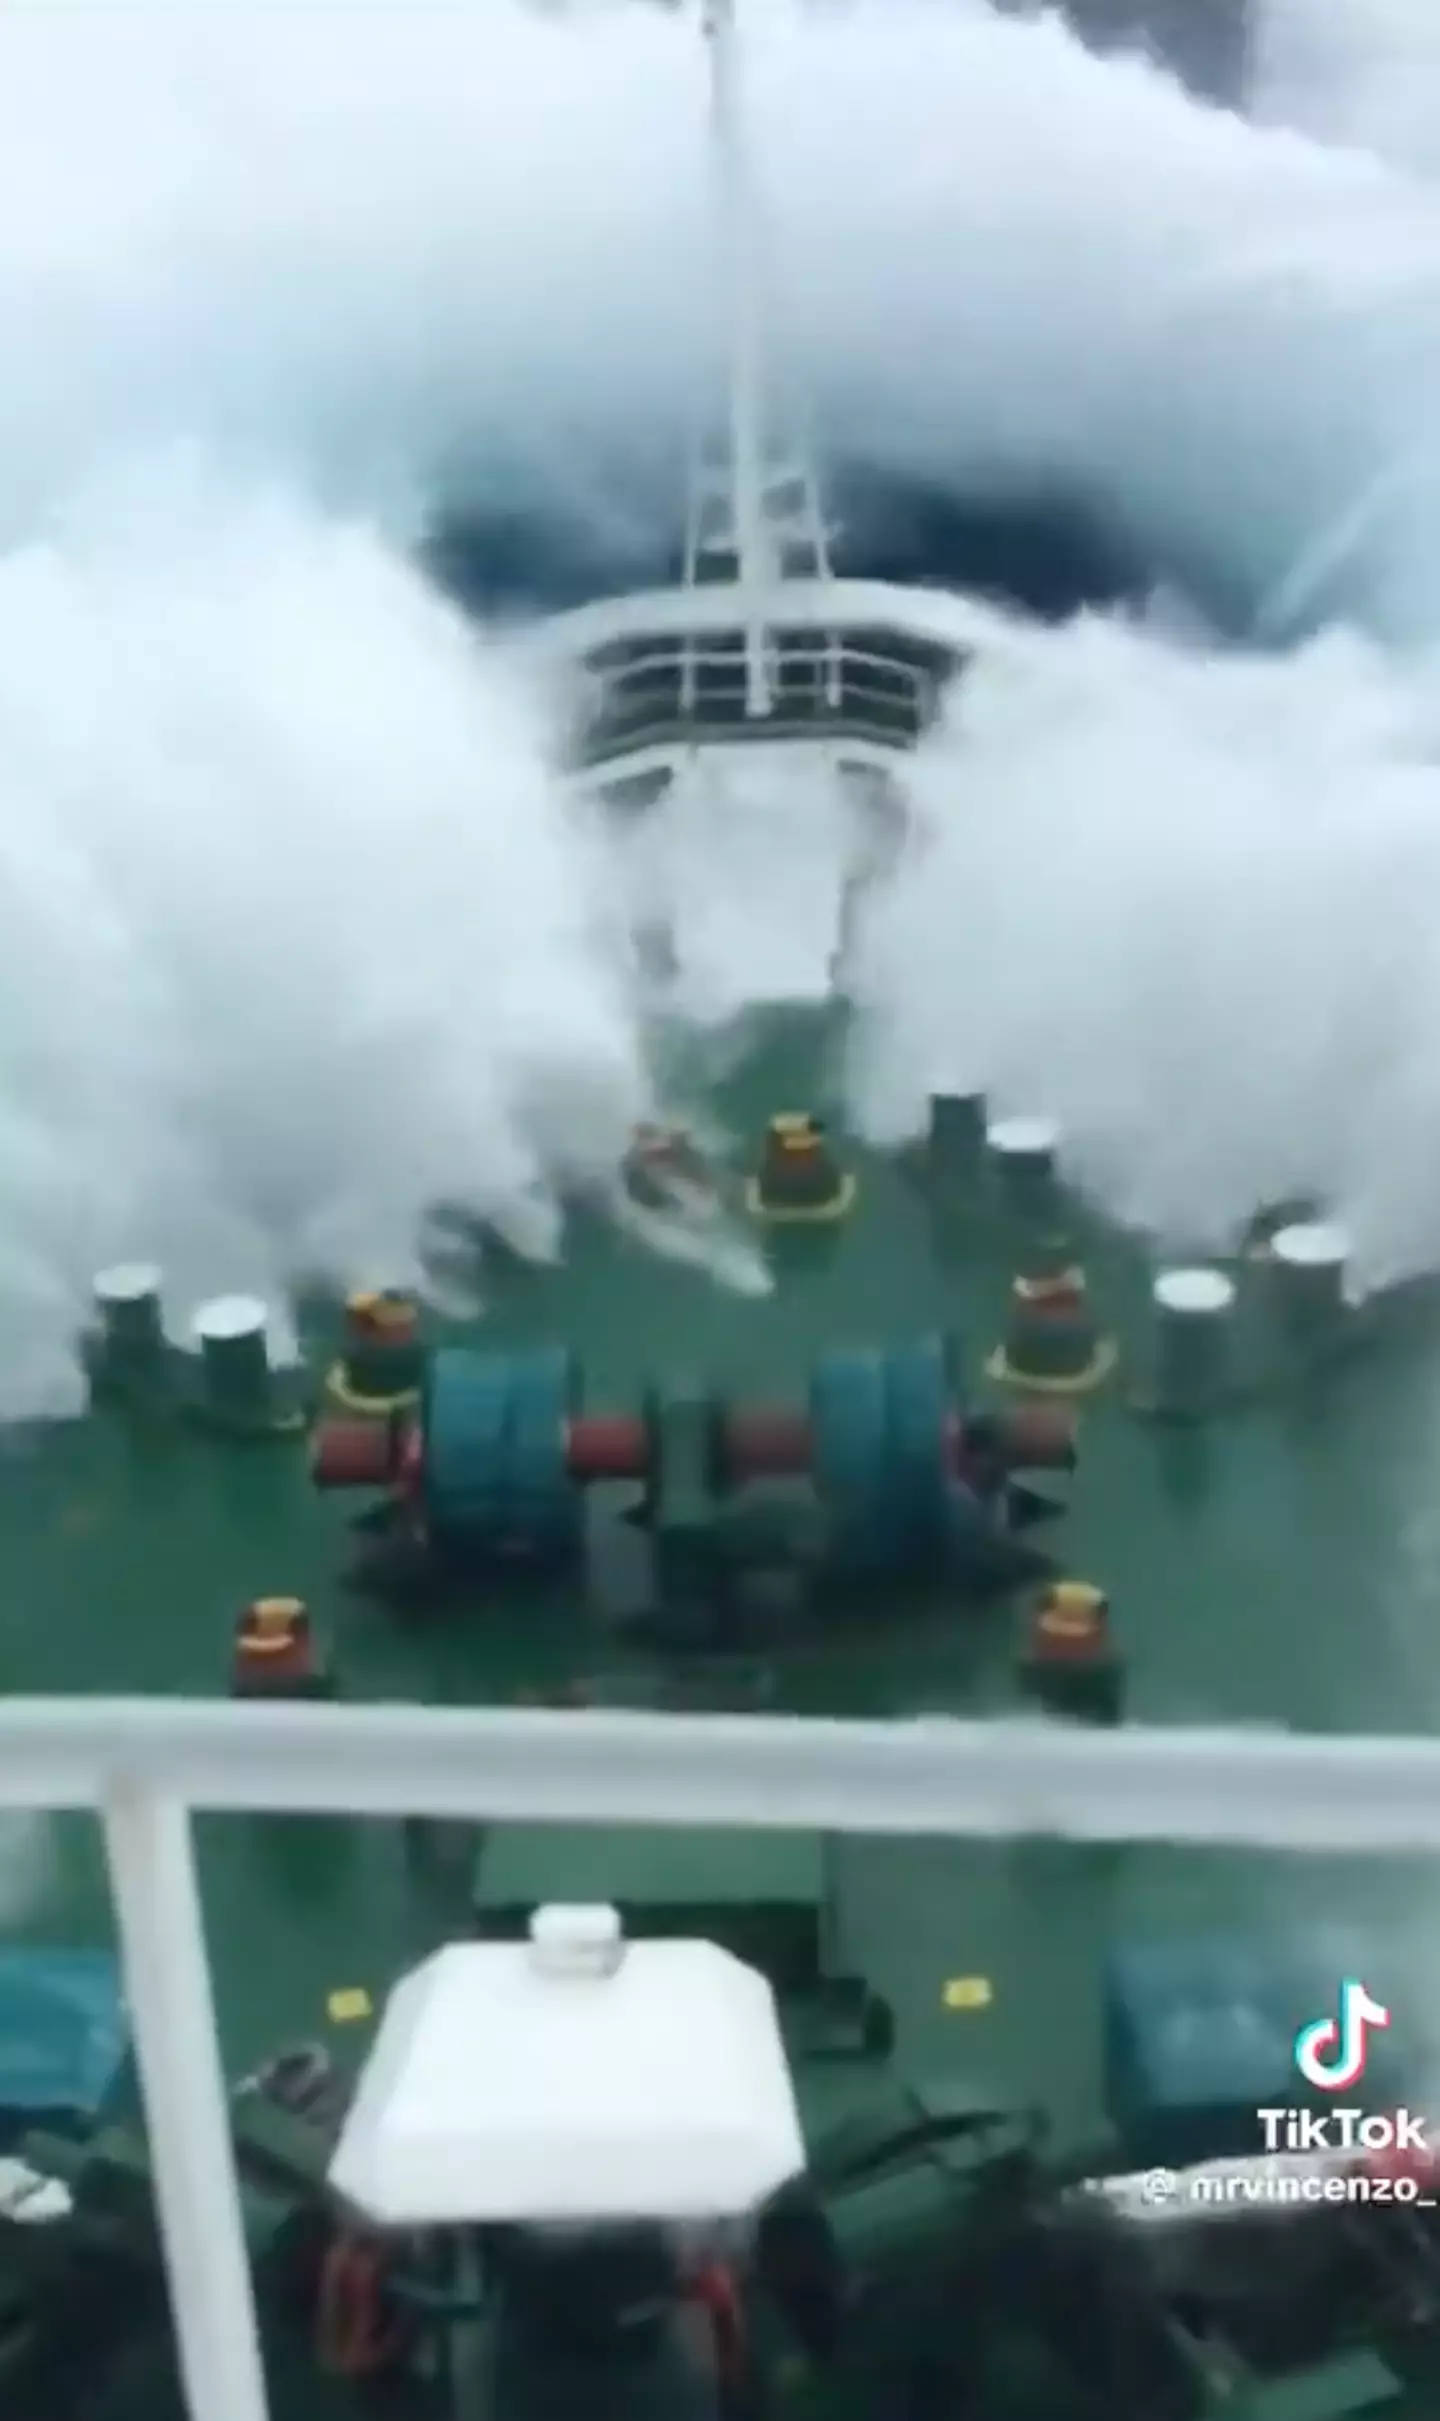 The ferocious waves of the North Sea have freaked people out online.